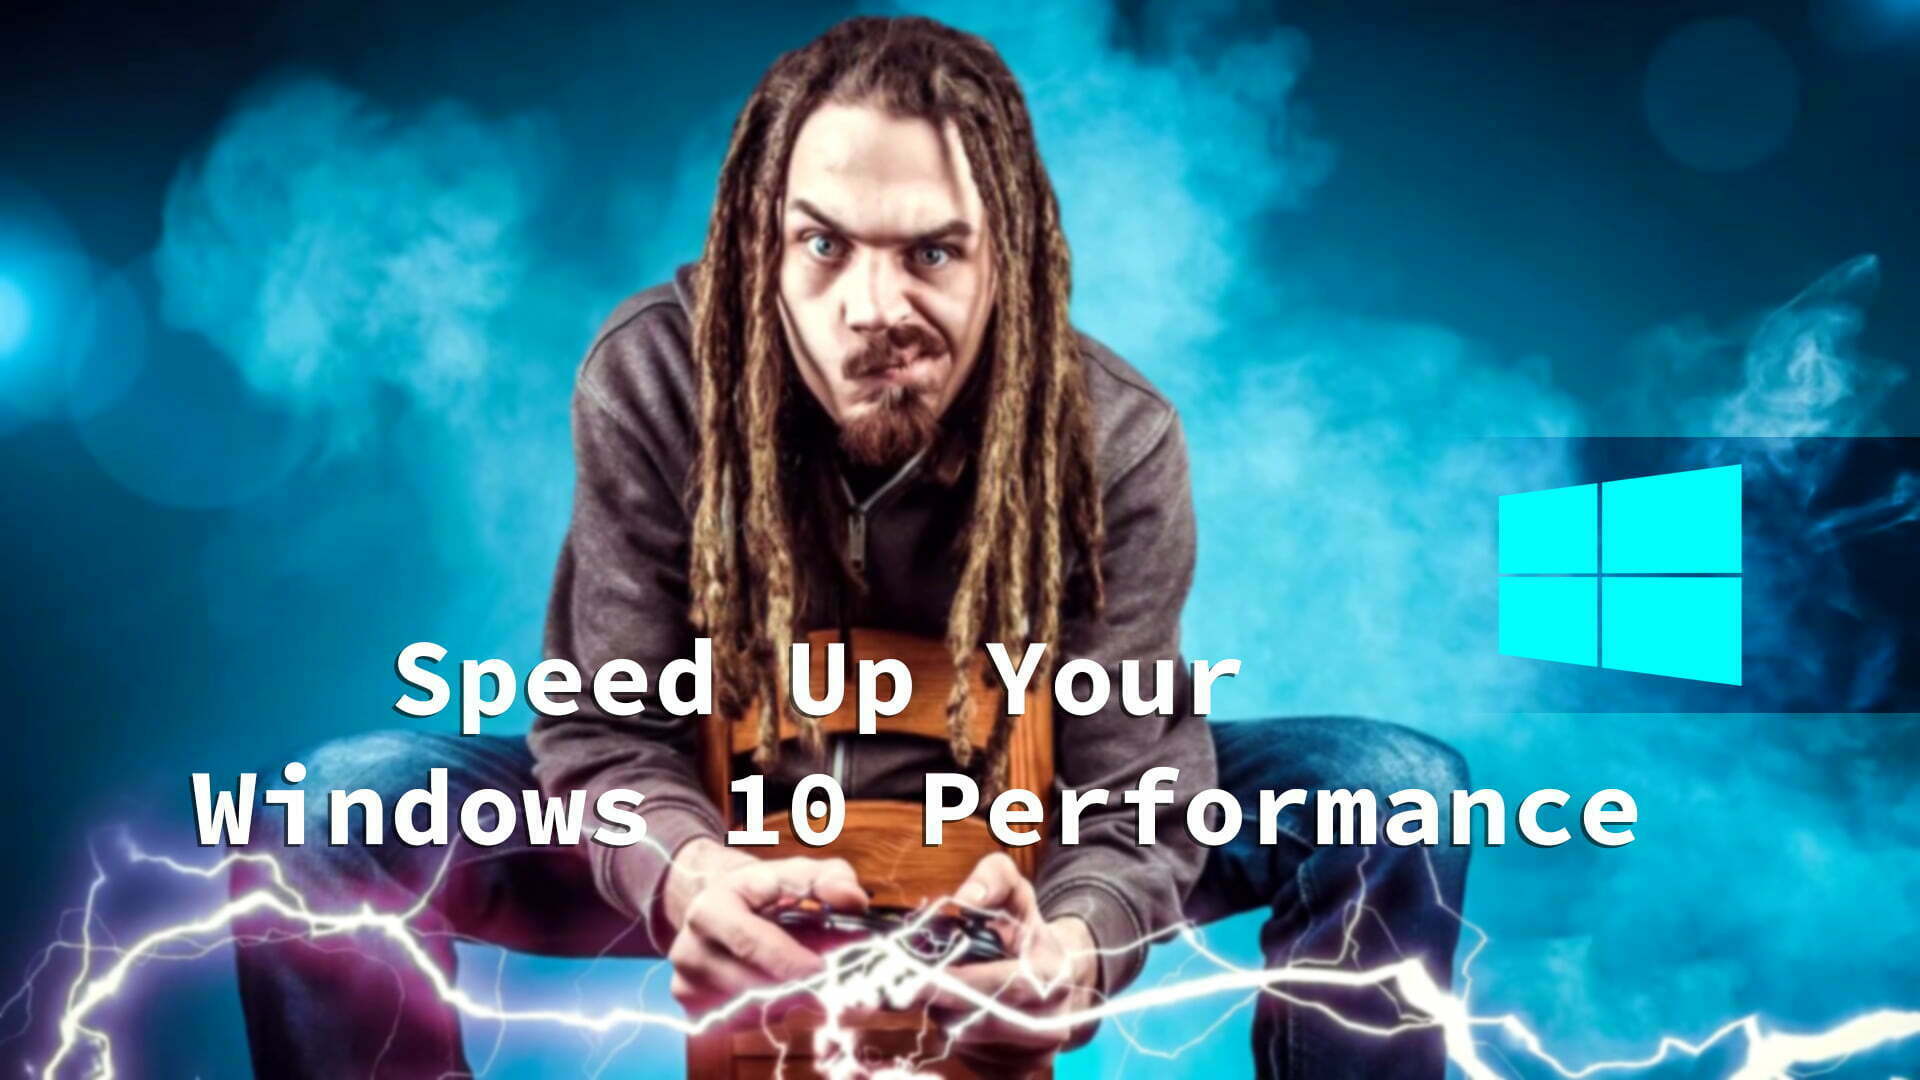 How to Speed Up Your Windows 10 Performance! (New)